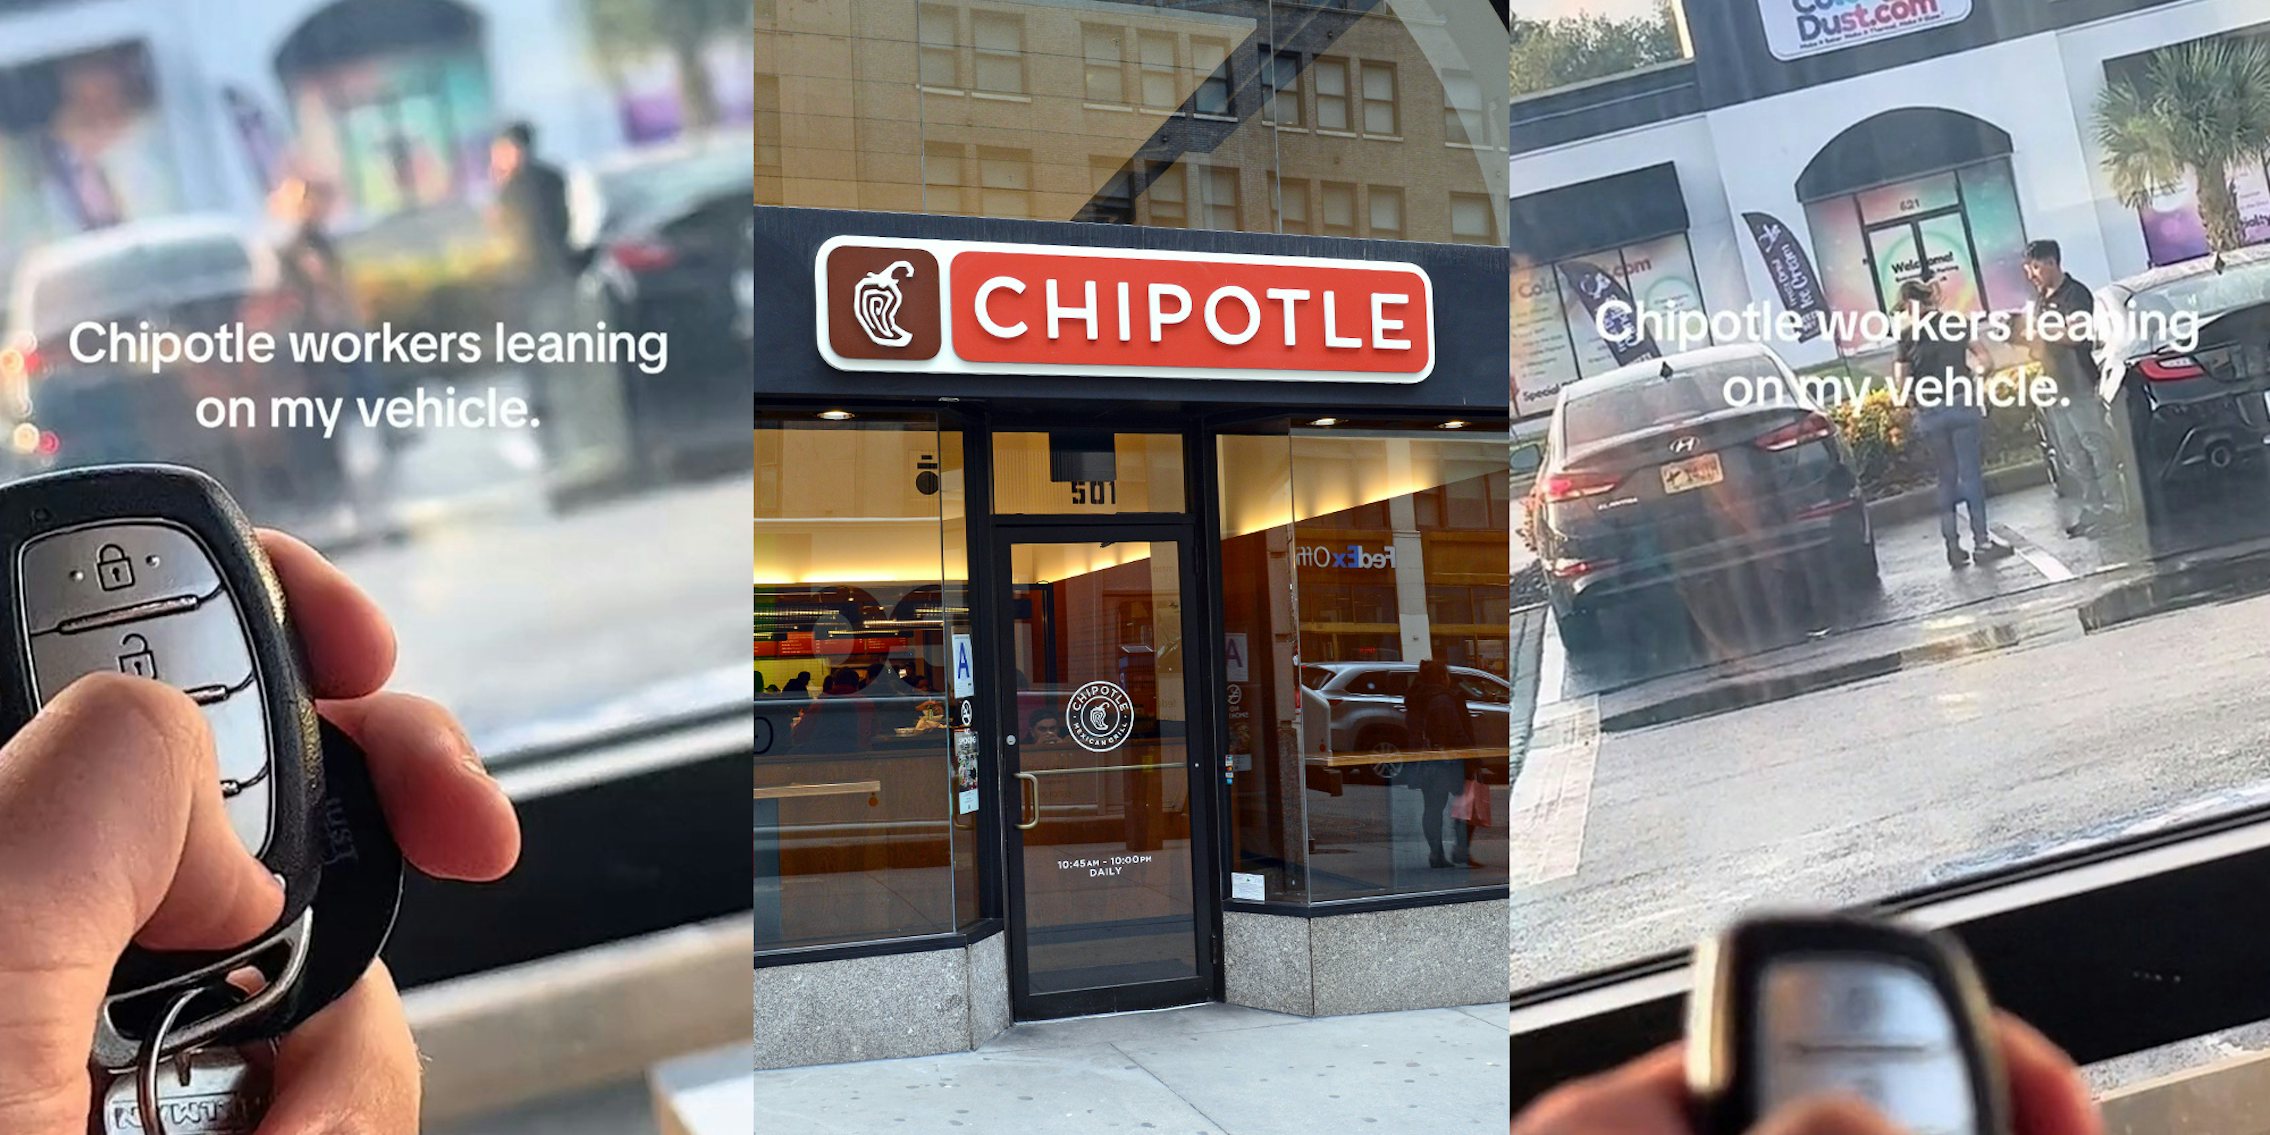 customer caught Chipotle workers leaning on their vehicle